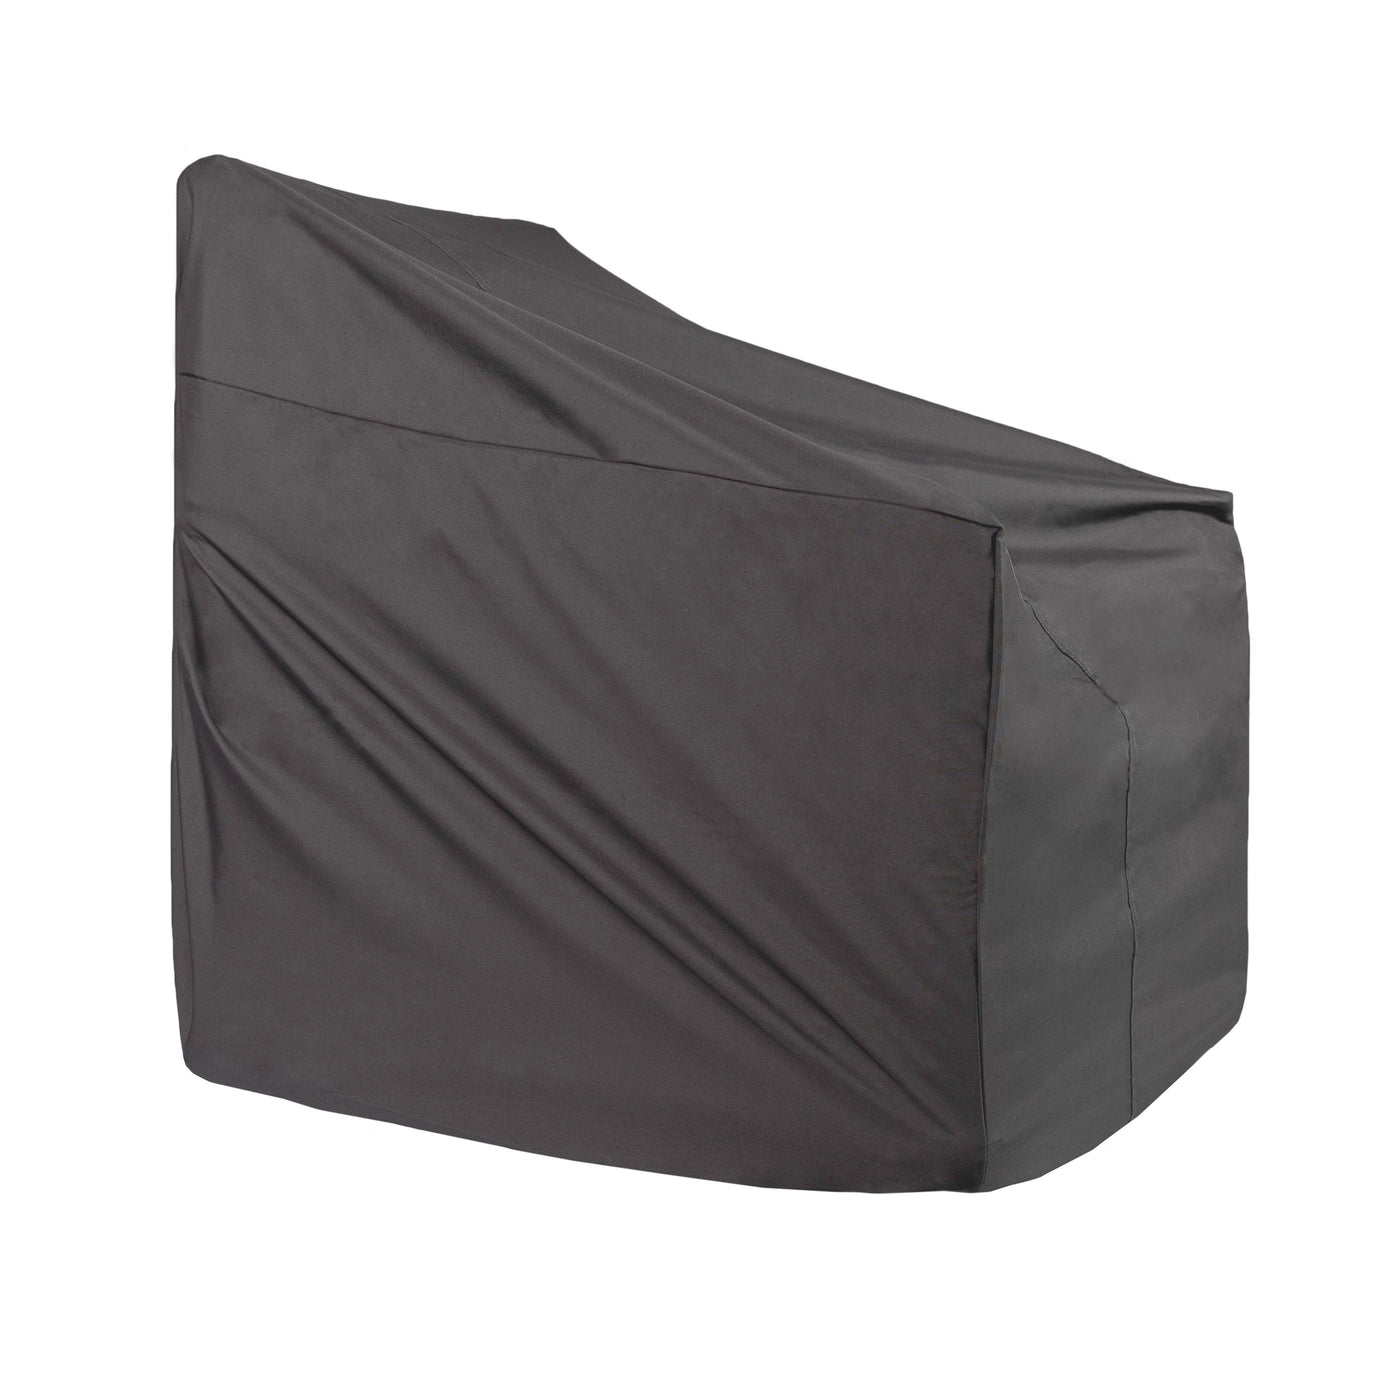 Serenity Swivel Chair Protective Weather Cover